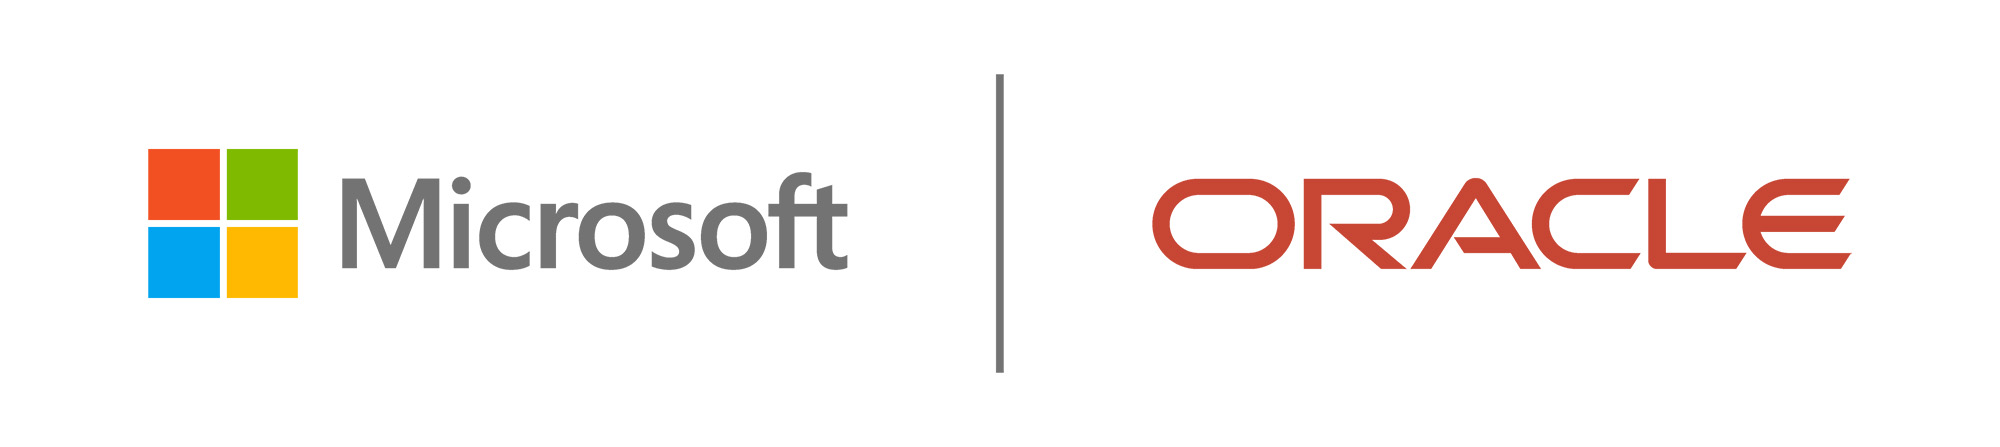 Microsoft and Oracle logo